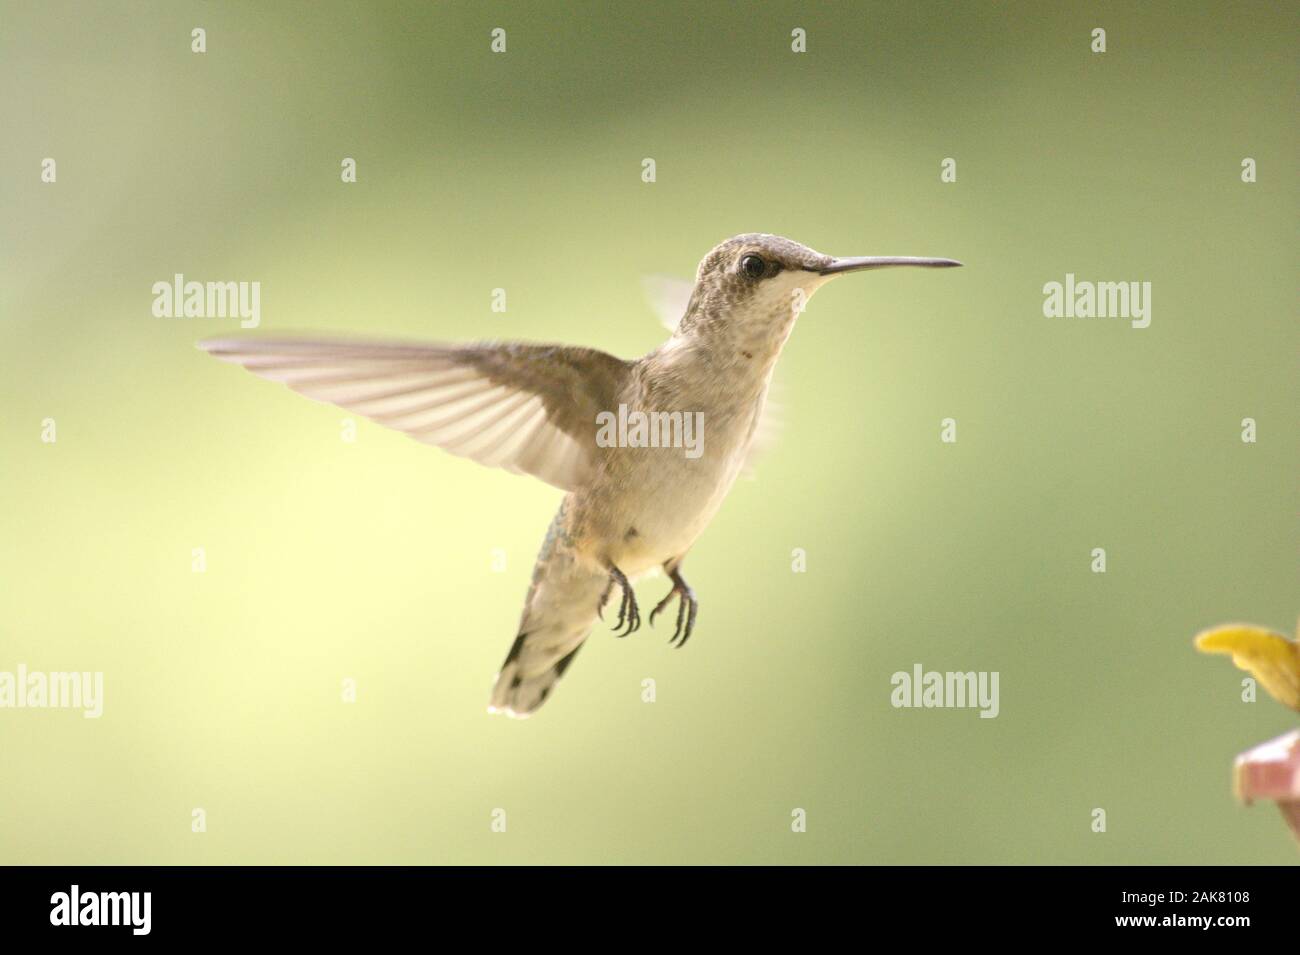 Ruby-throated hummingbird in flight approaching a feeder. Stock Photo